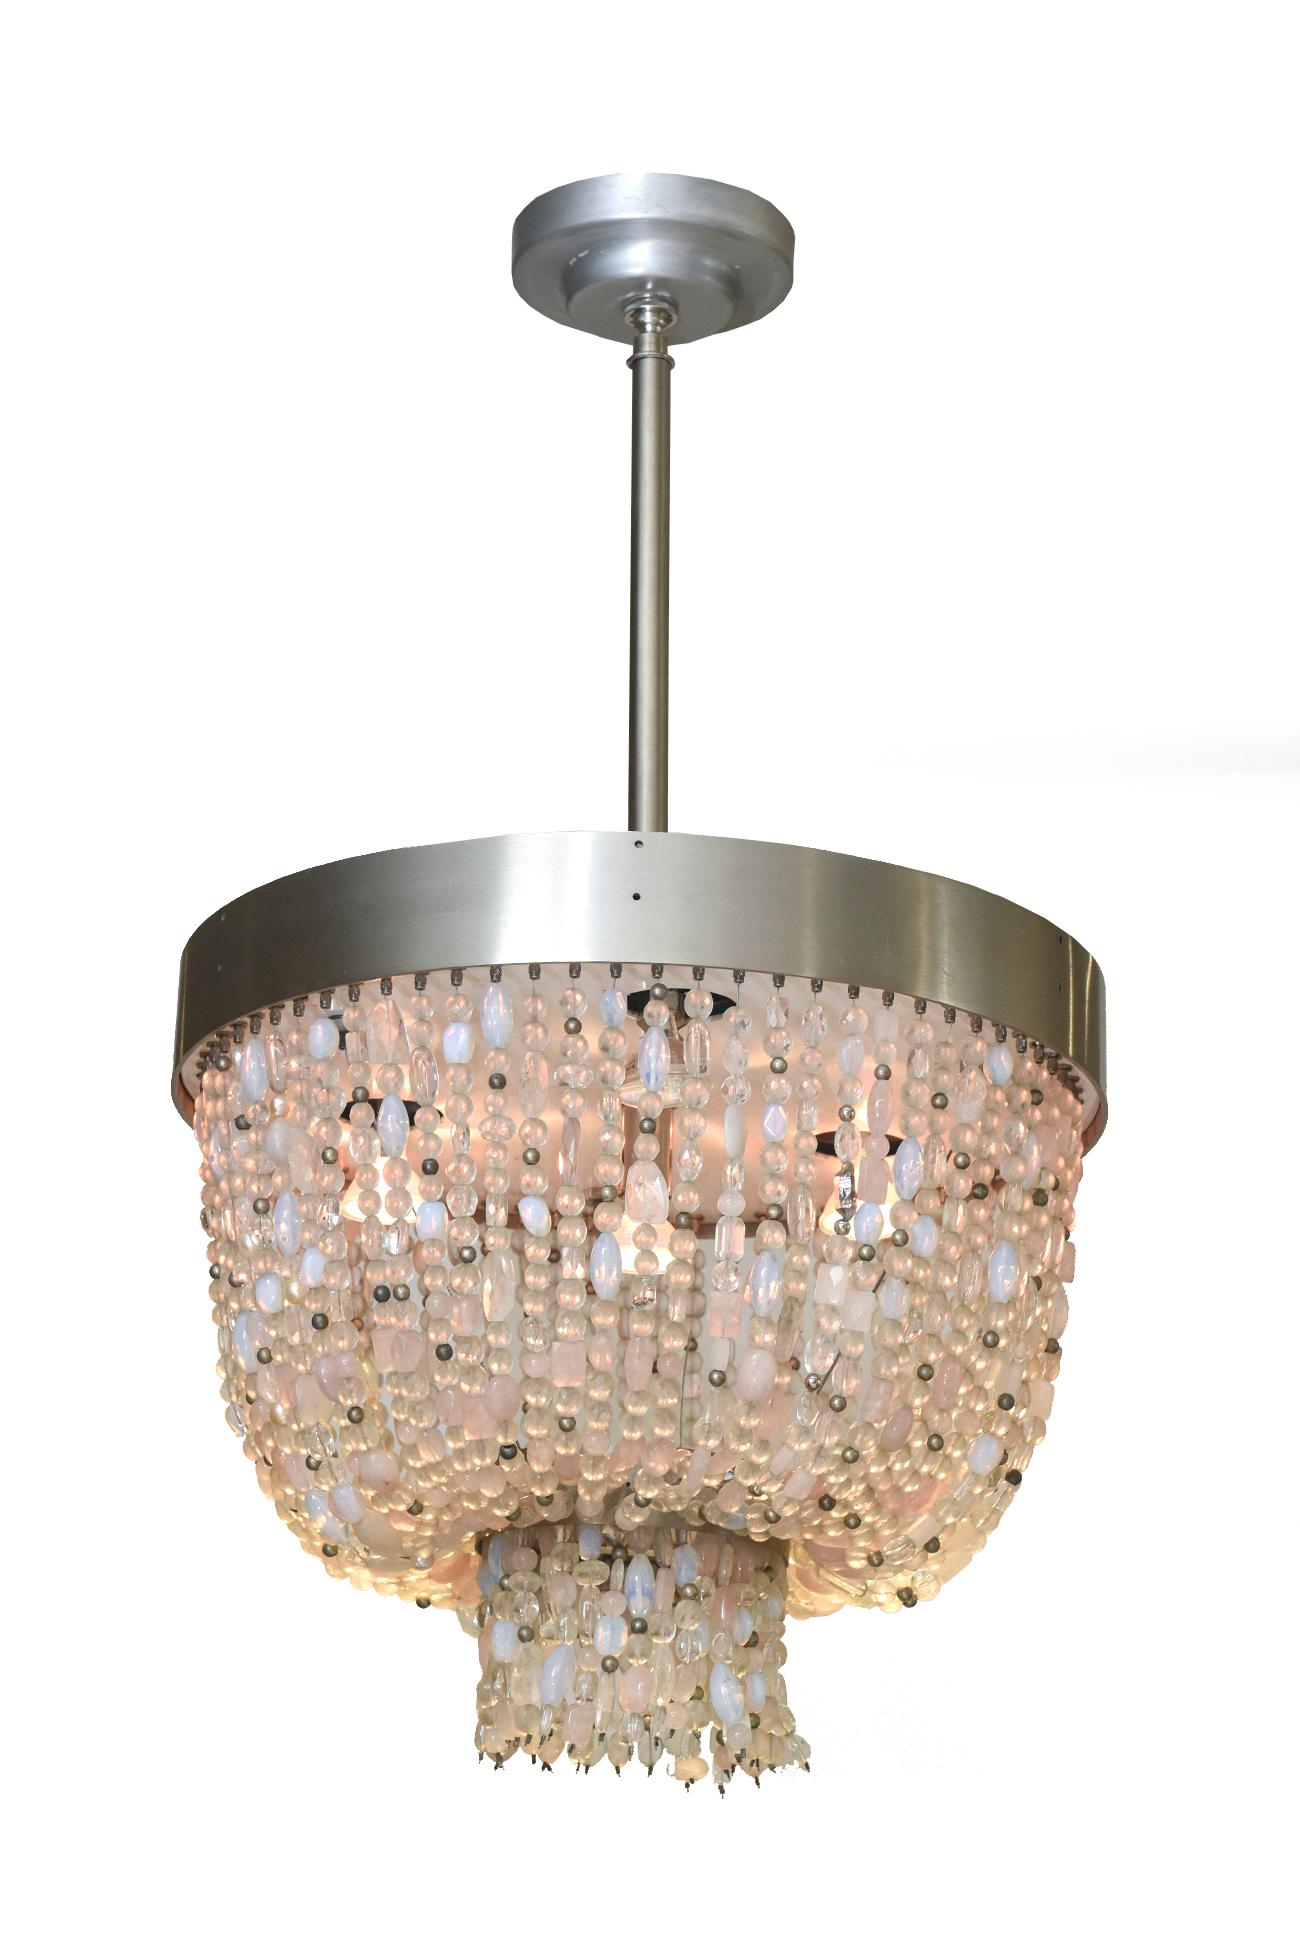  Quartz and Stainless Steel Two Tier Pink Lavaliere Chandelier by Thomas Fuchs For Sale 5